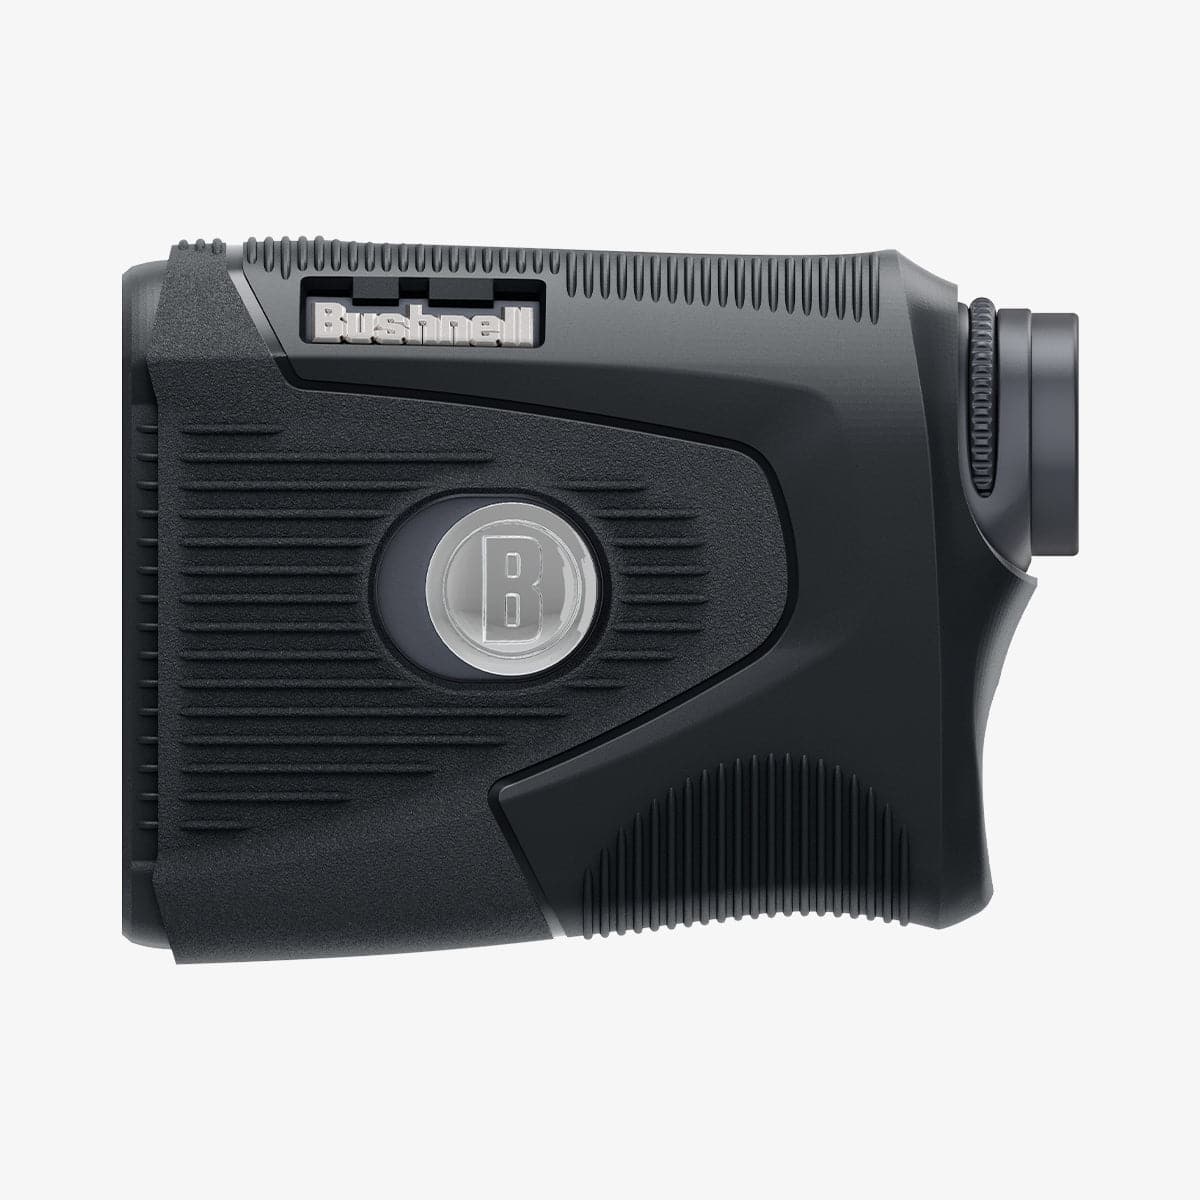 ACS04228 - Bushnell Pro XE Rangefinder AirTag Case in black showing the side